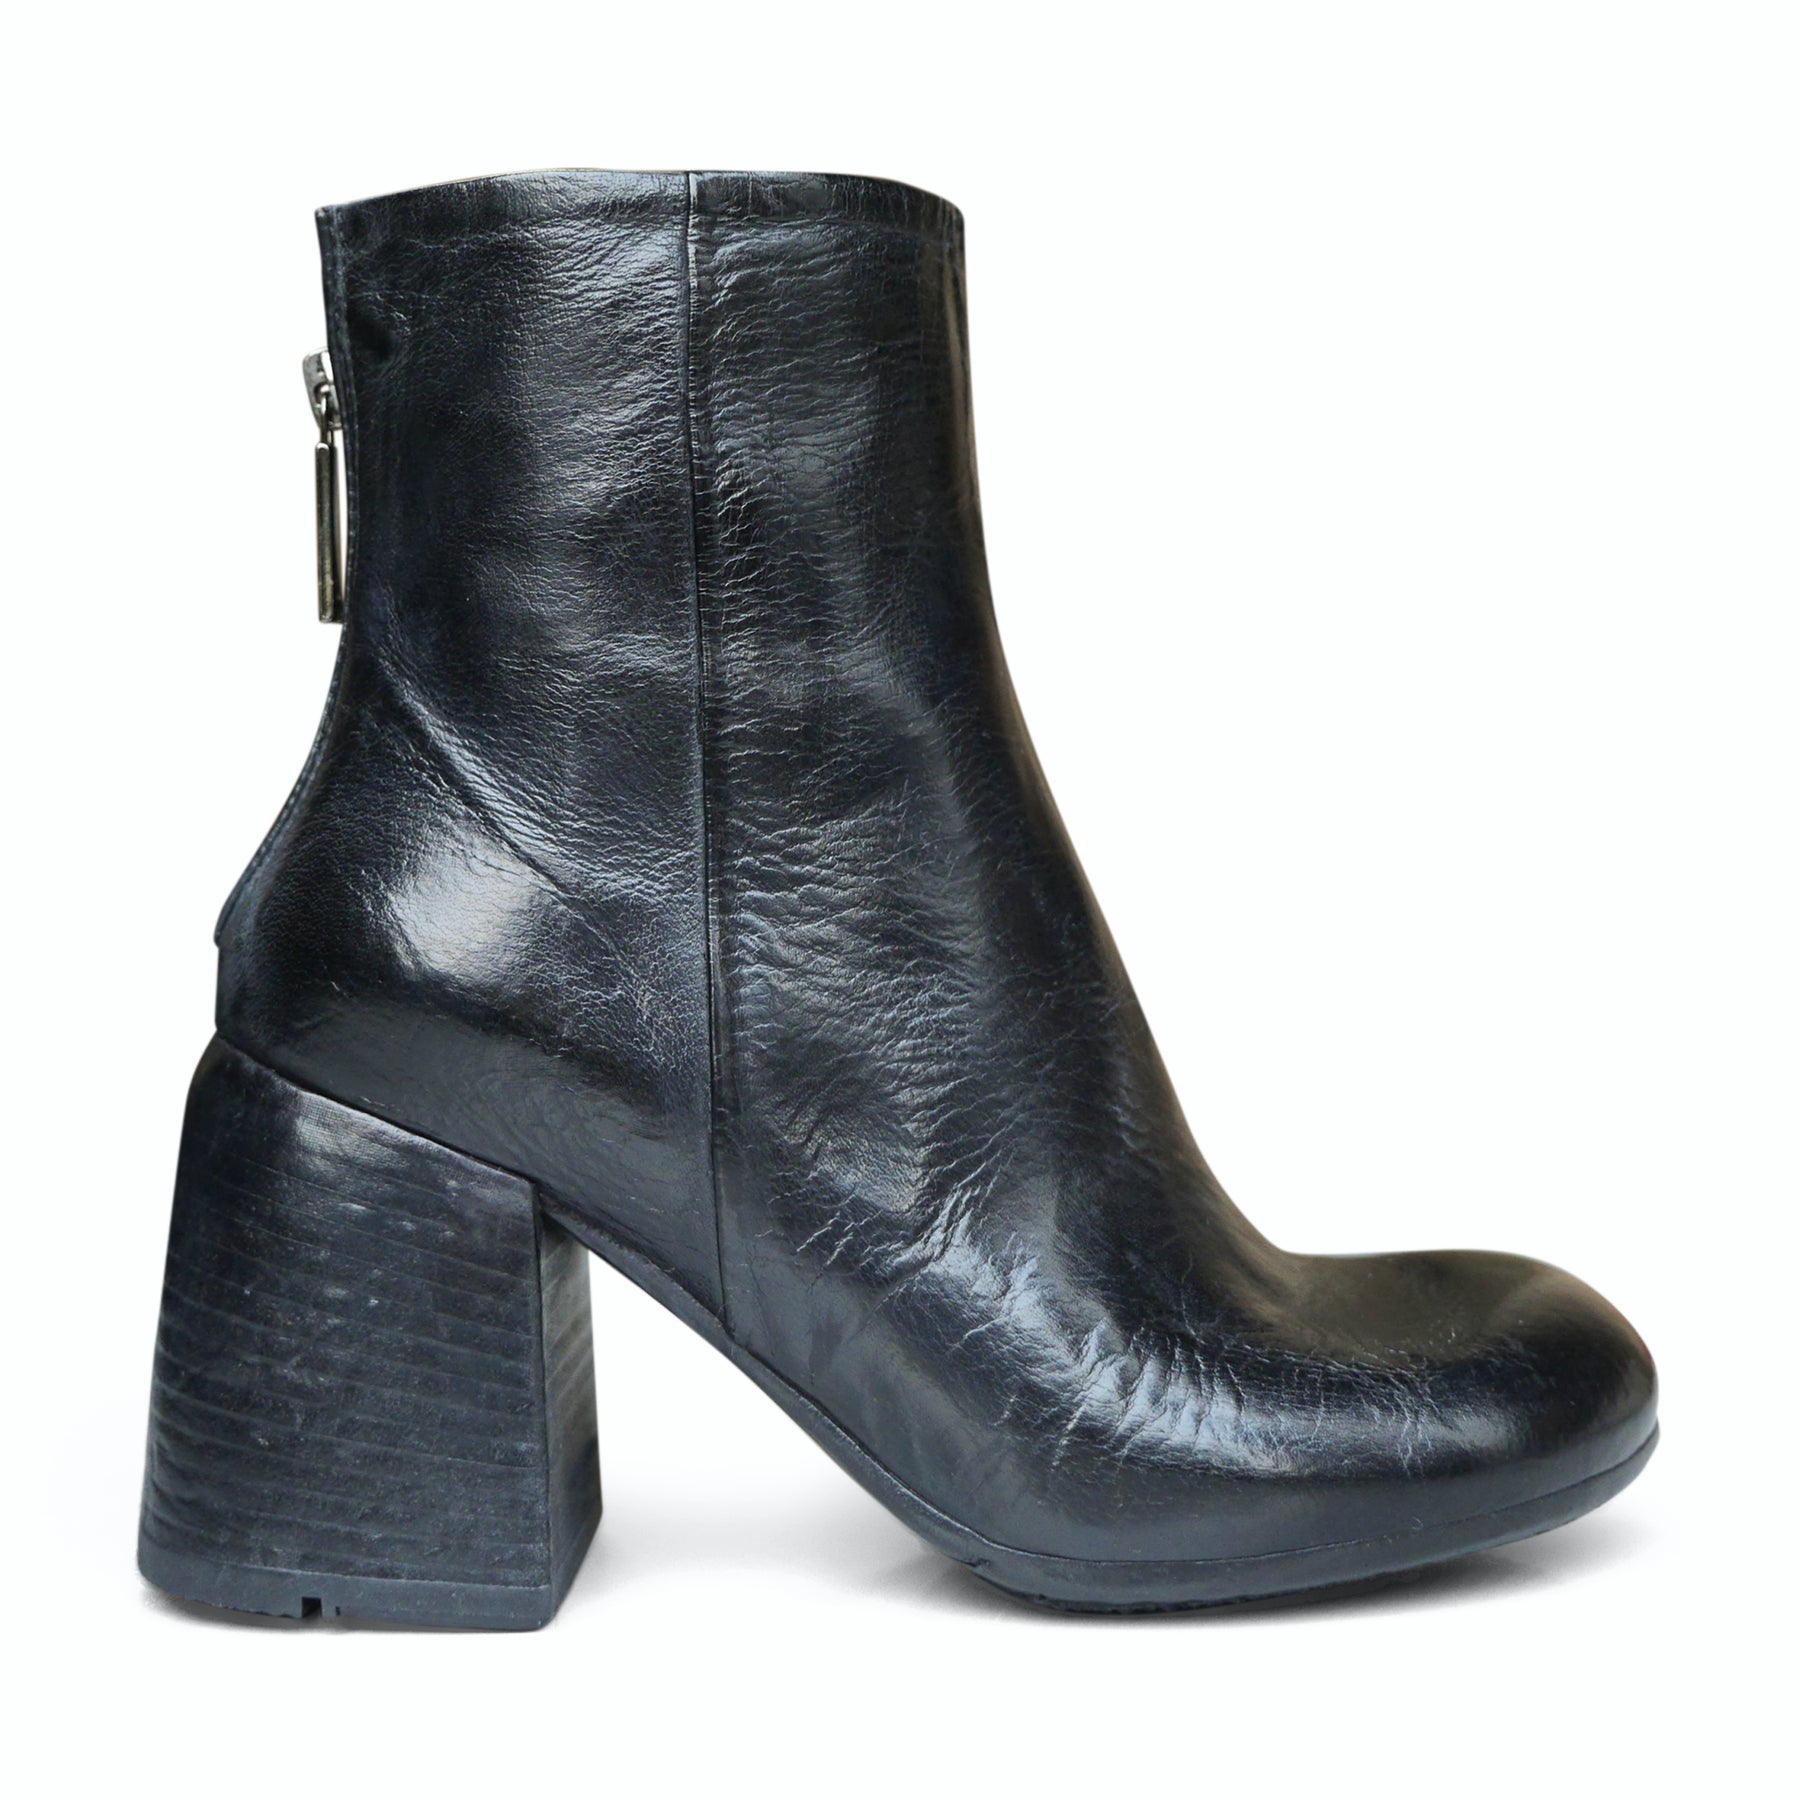 FPO2A - Black Ankle Boot